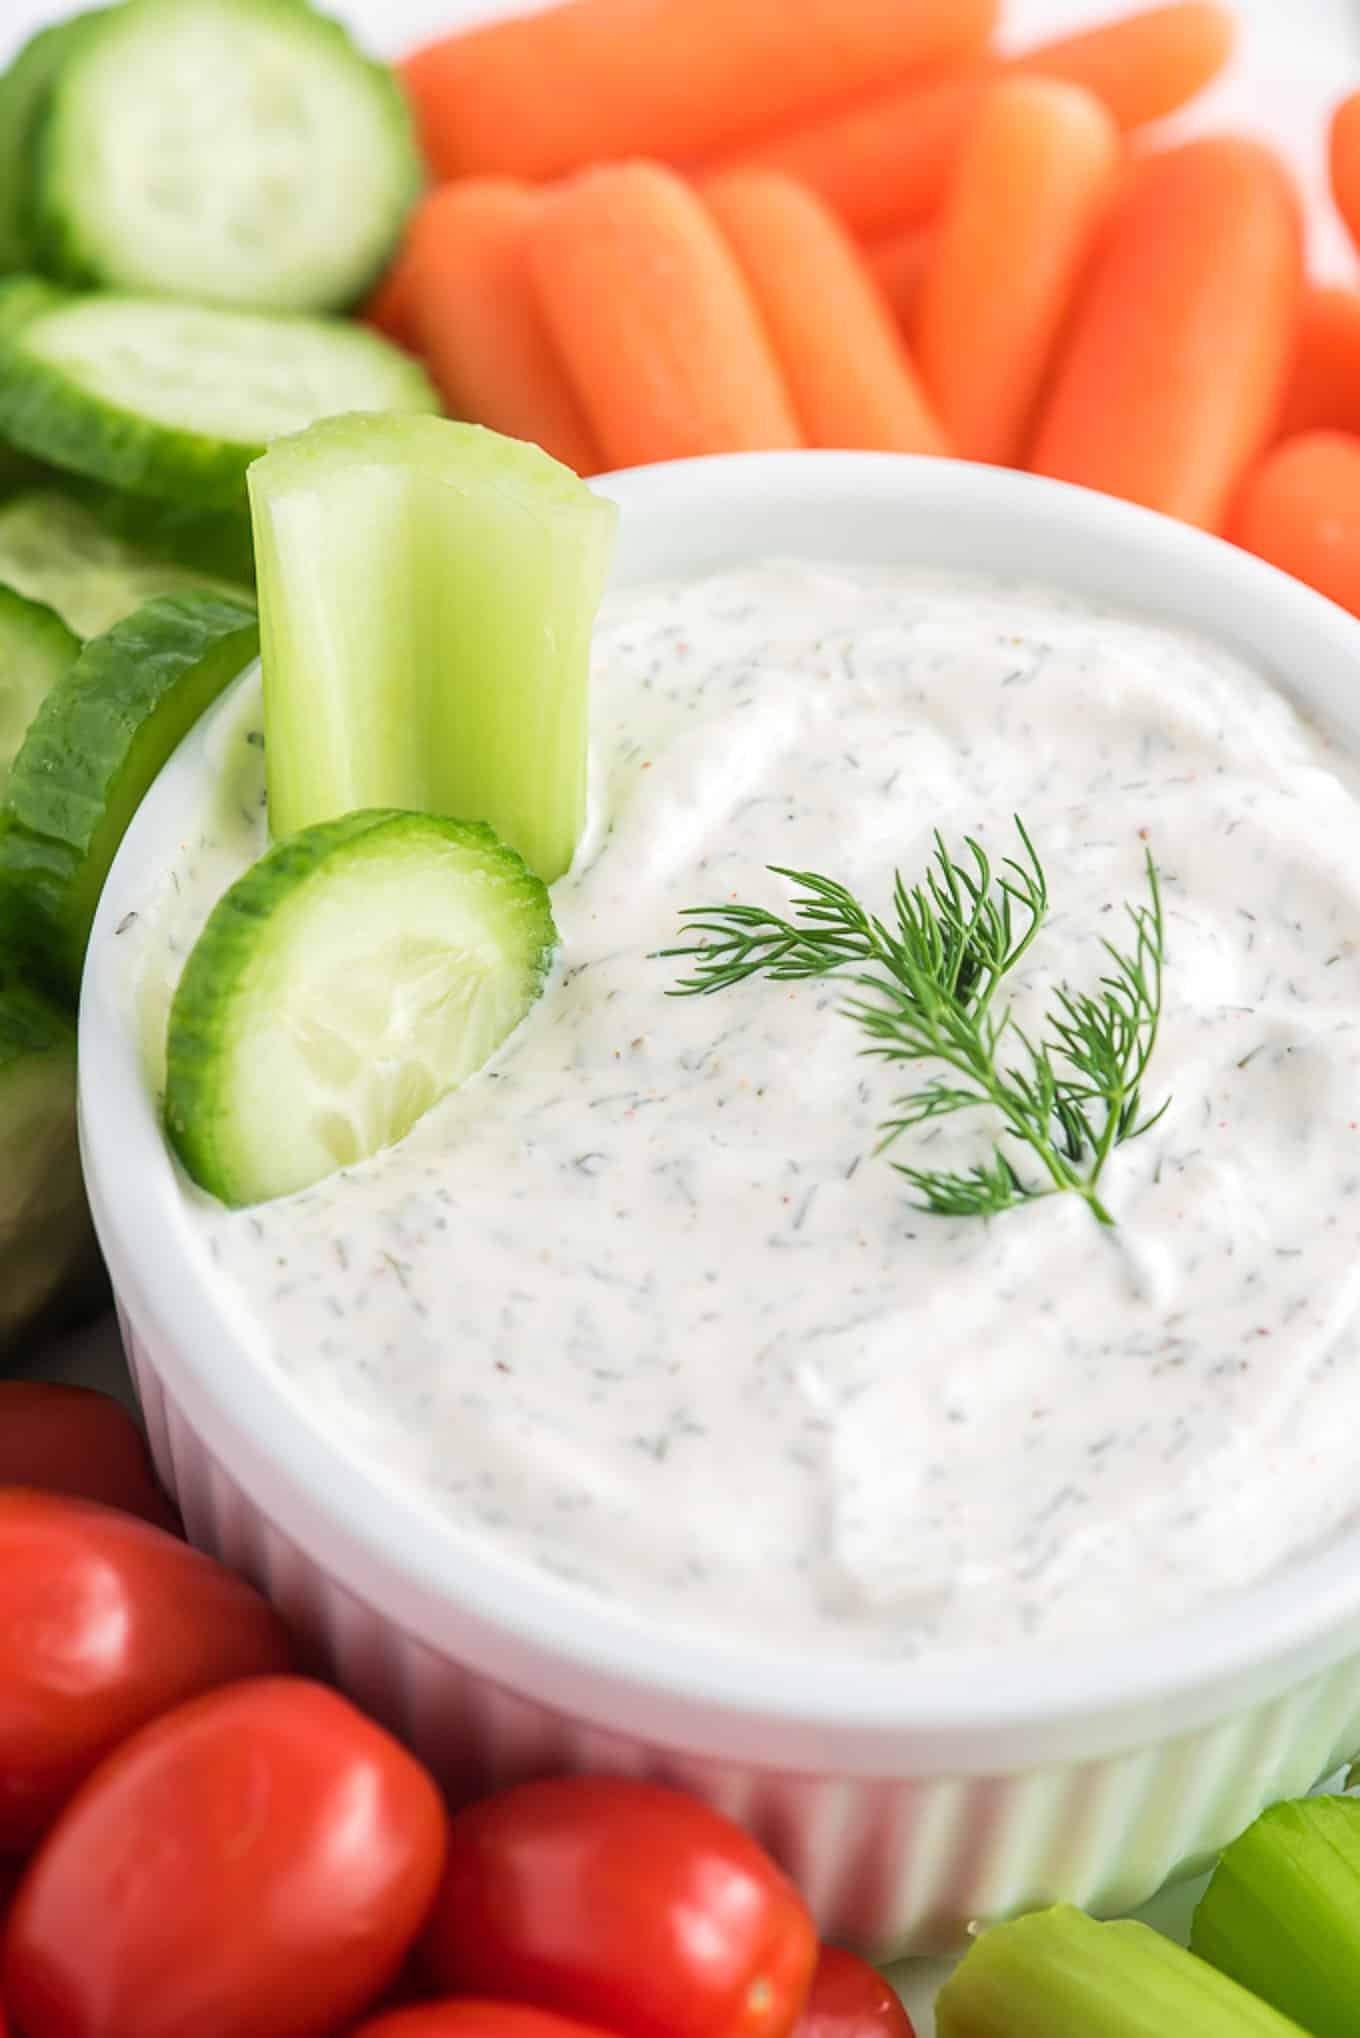 A cucumber and celery stick in dill dip with sour cream.